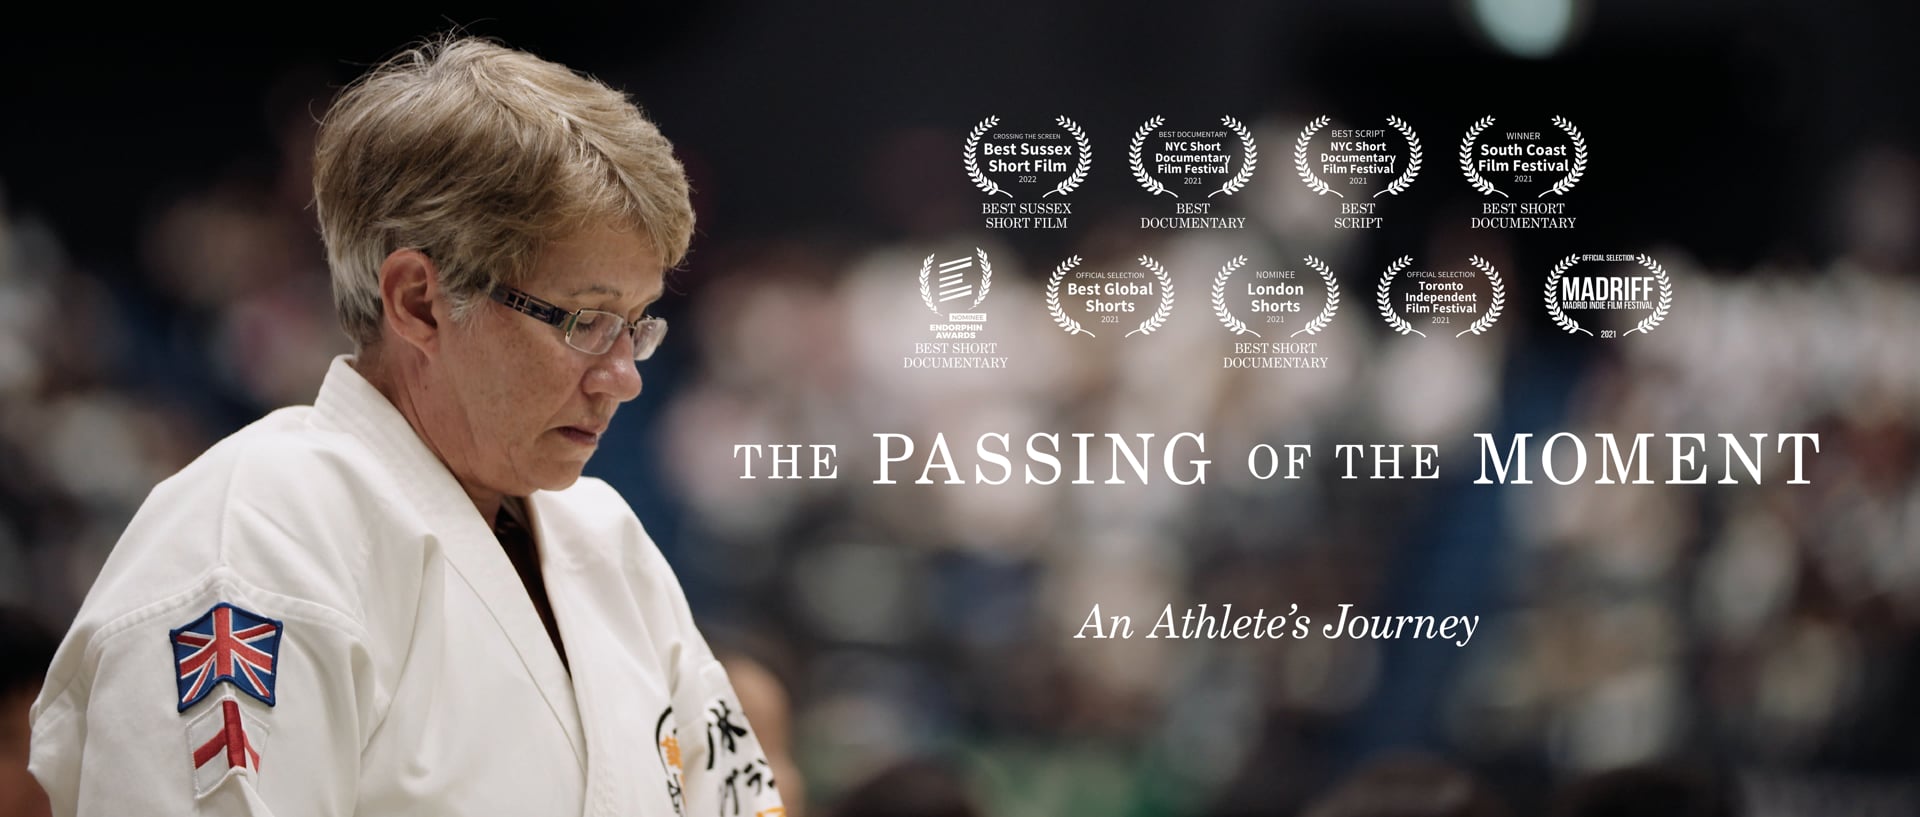 The Passing of the Moment: An Athlete's Journey